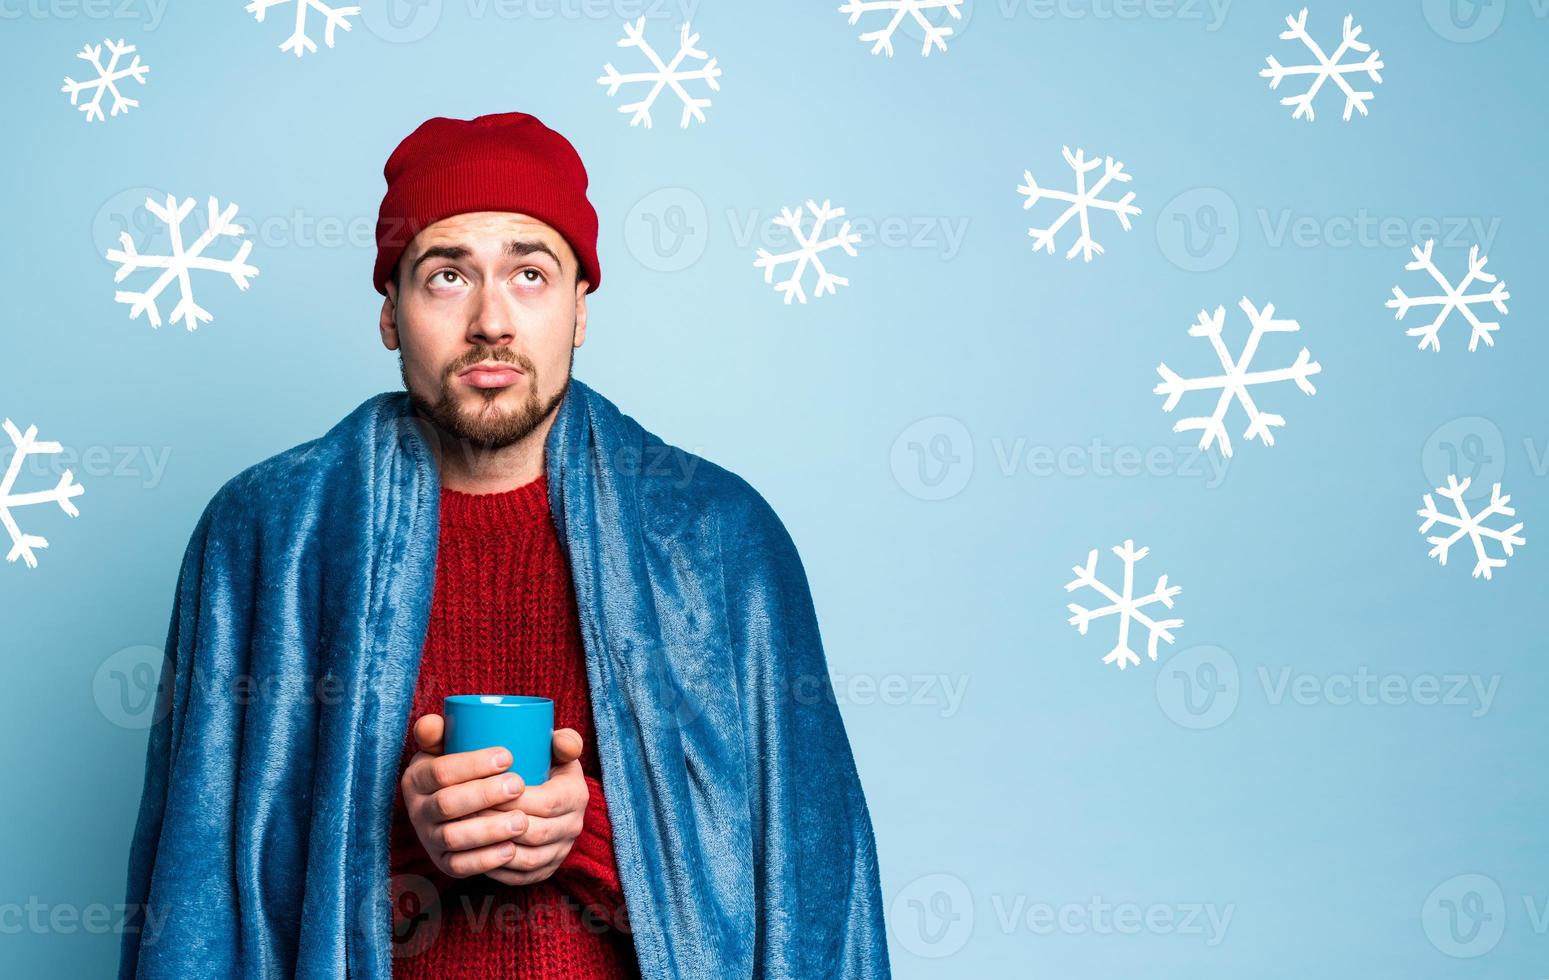 Boy caught a cold and drinks hot the. Cyan background. Concept of illness photo